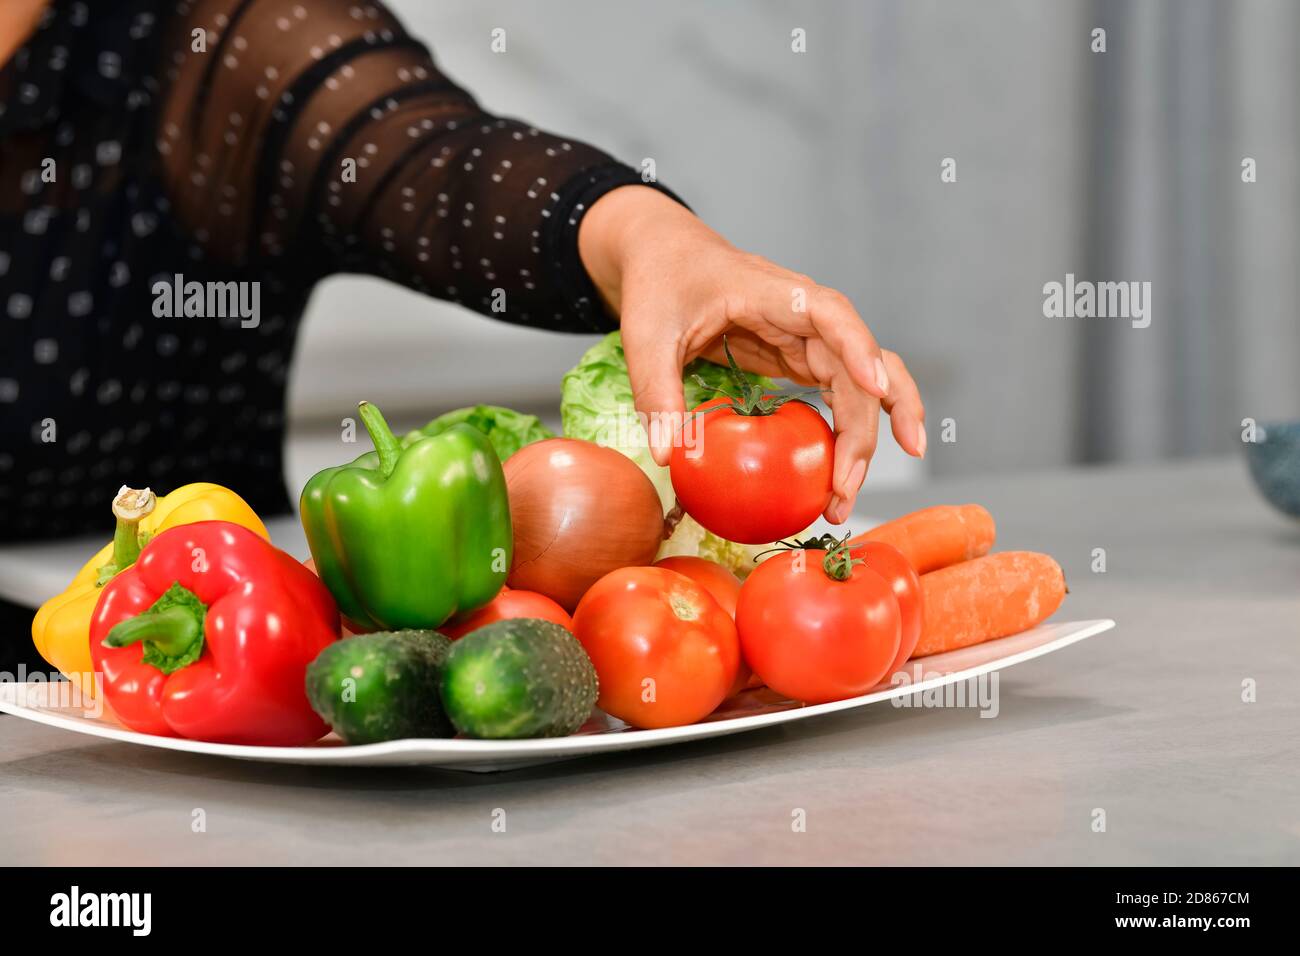 Close up of a female hand picking up a delicious looking tomato from a plate with assorted vegetables. Healthy food and vegetables concept. Stock Photo